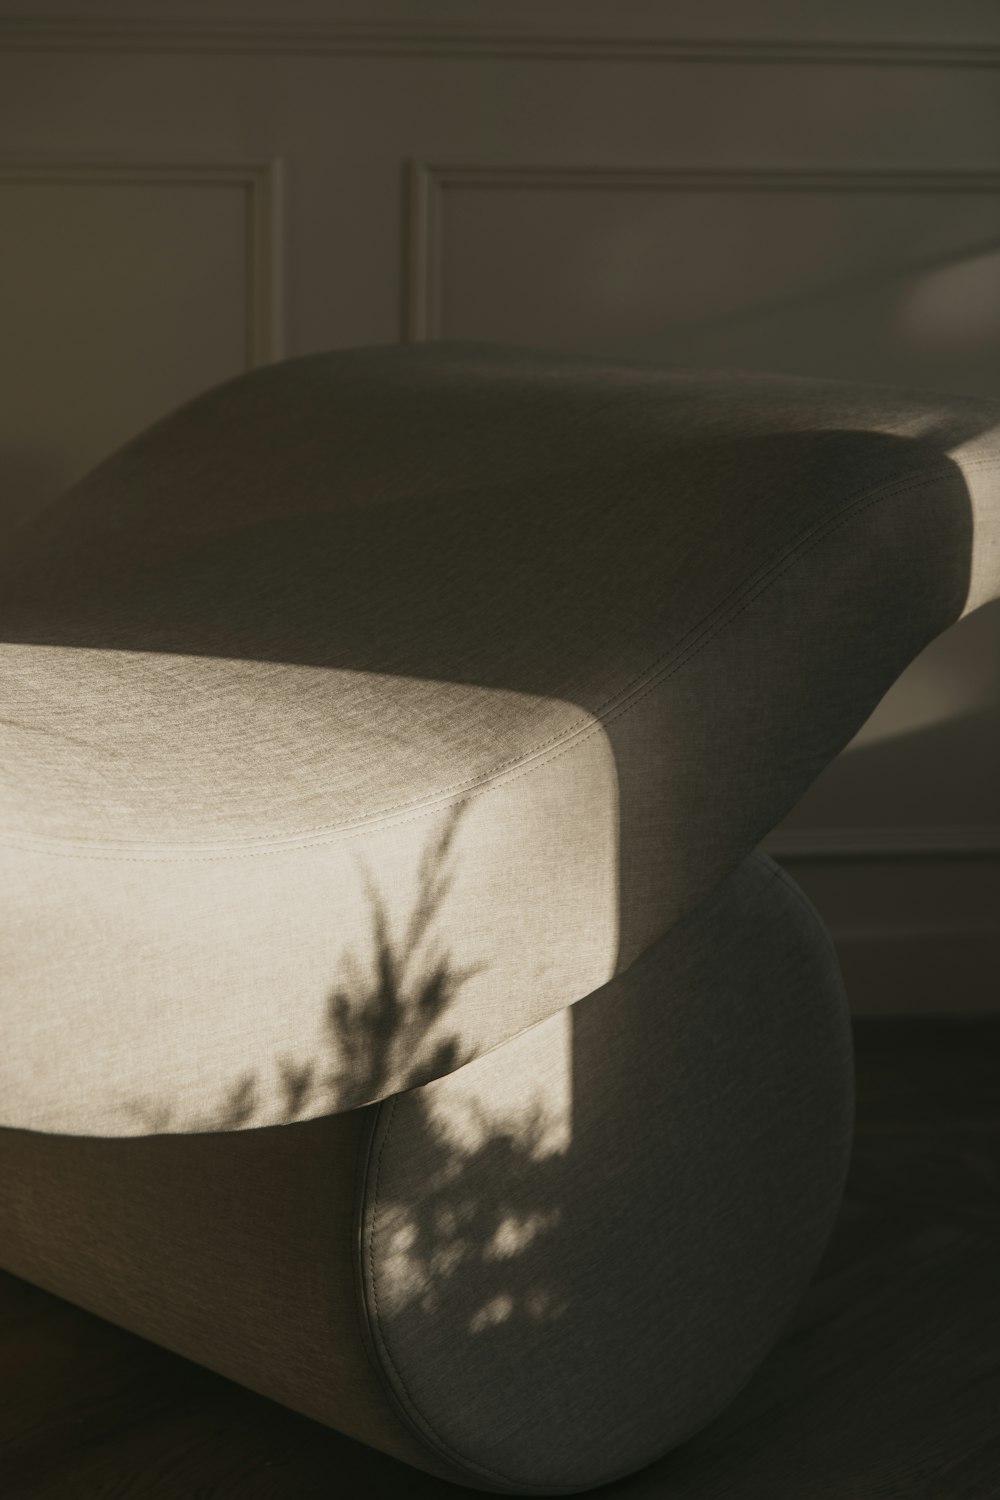 the shadow of a plant on the back of a chair